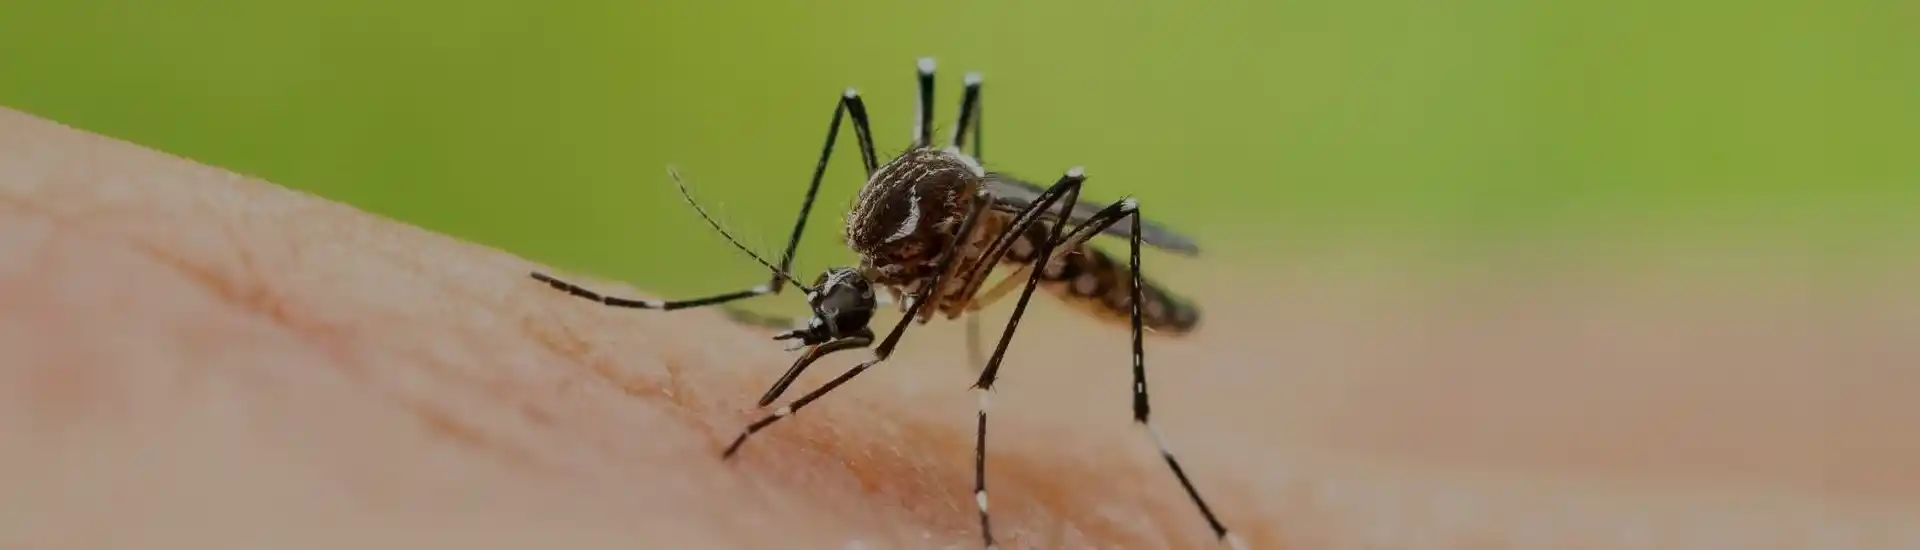 Effective Mosquito Control Services for a Safer Outdoor Experience